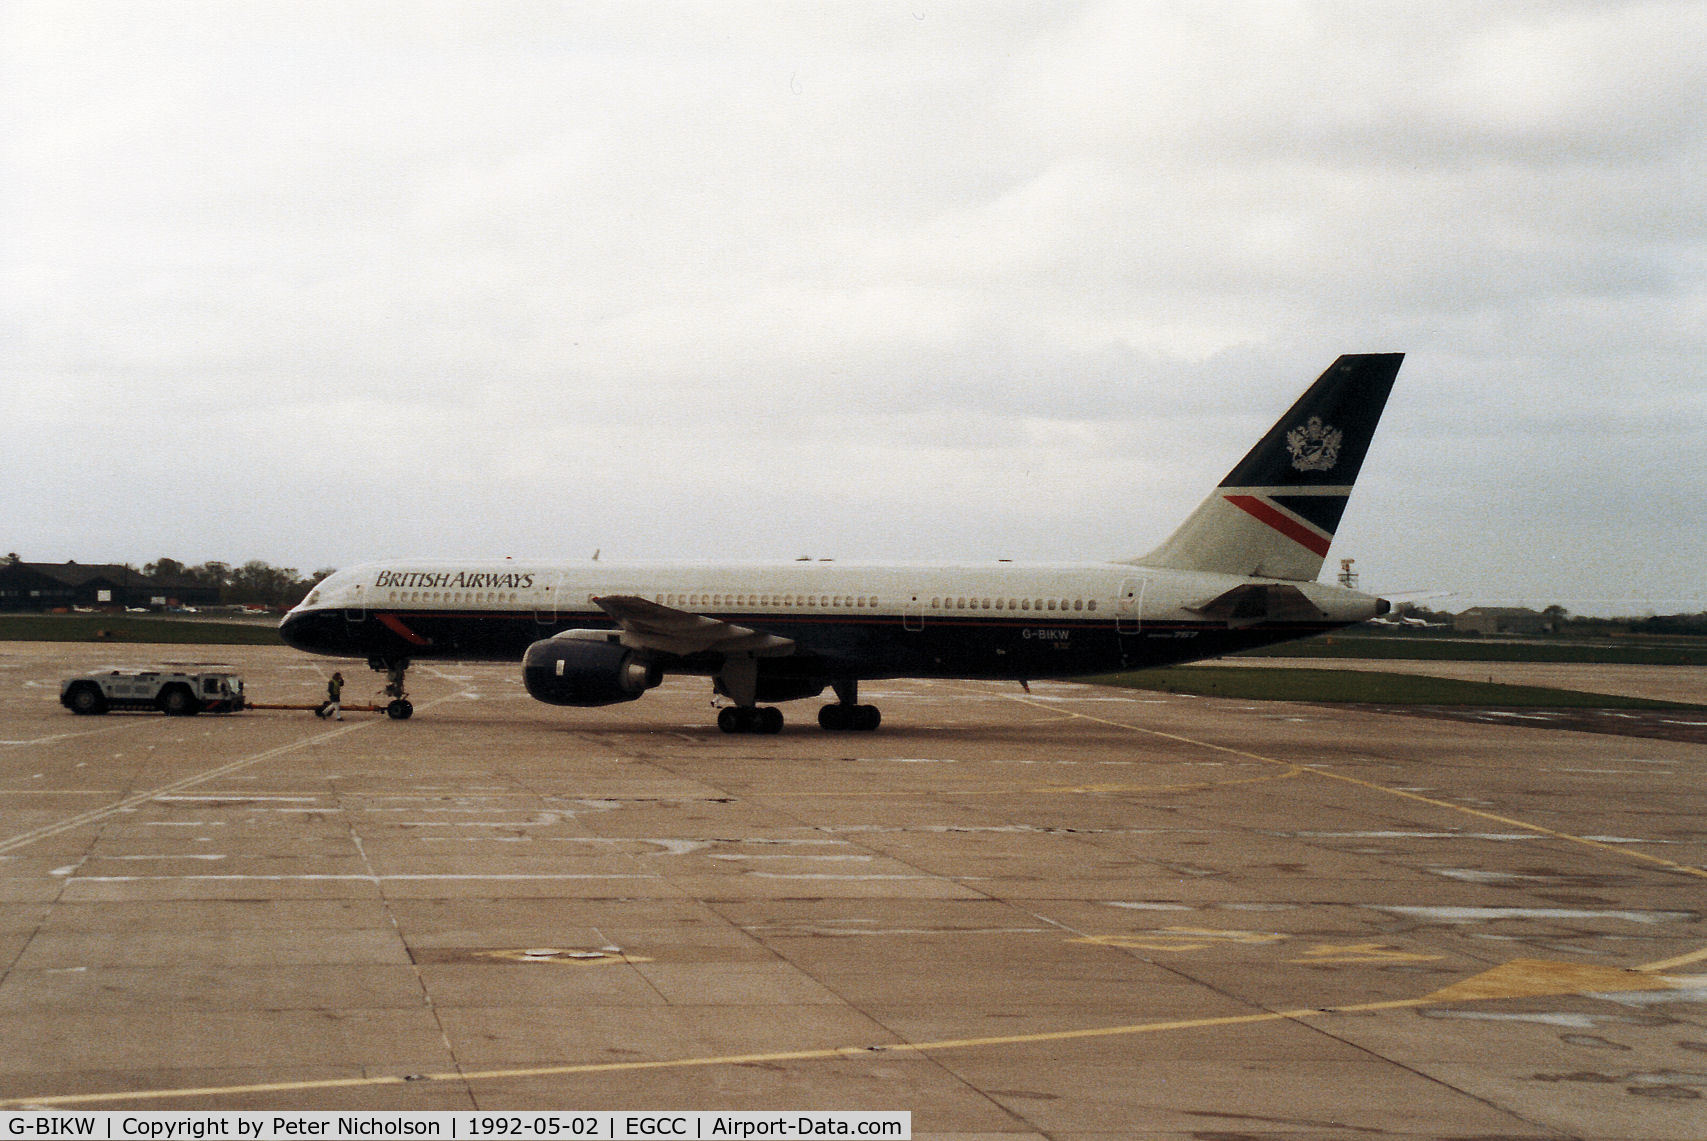 G-BIKW, 1986 Boeing 757-236 C/N 23492, Boeing 757-236 of British Airways on push-back at Manchester in May 1992.